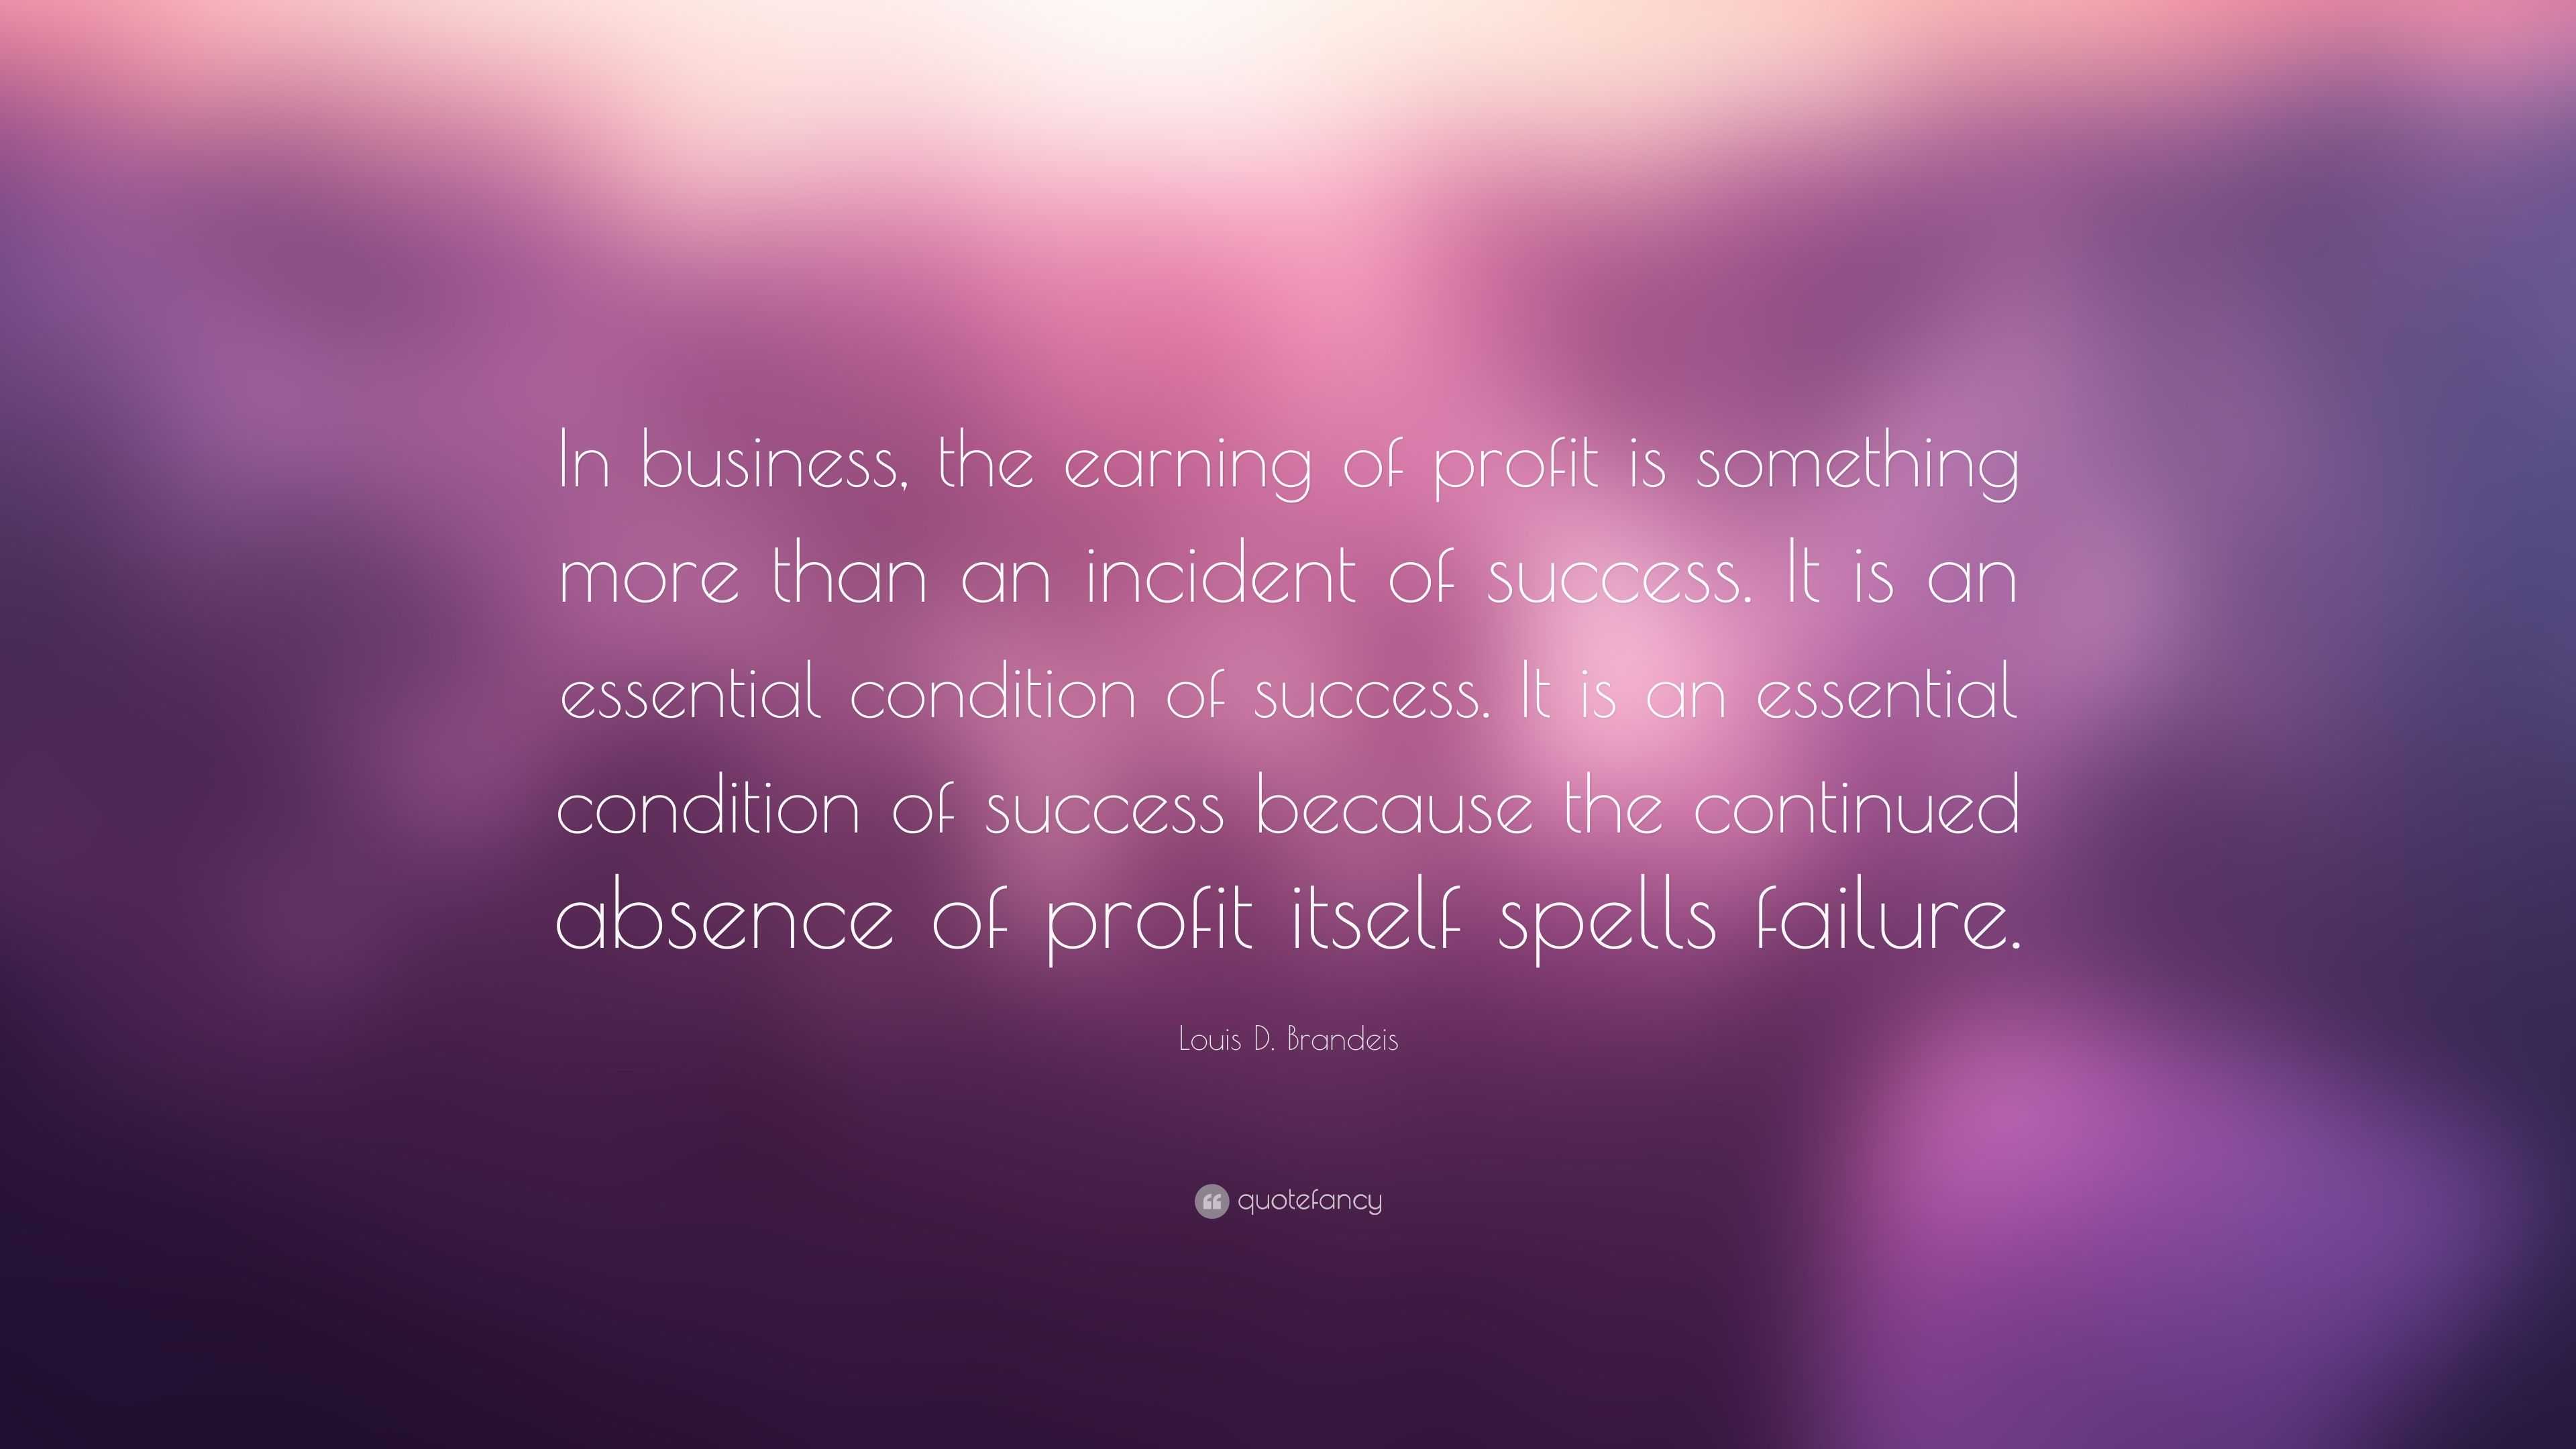 Louis D. Brandeis Quote: "In business, the earning of profit is something more than an incident ...